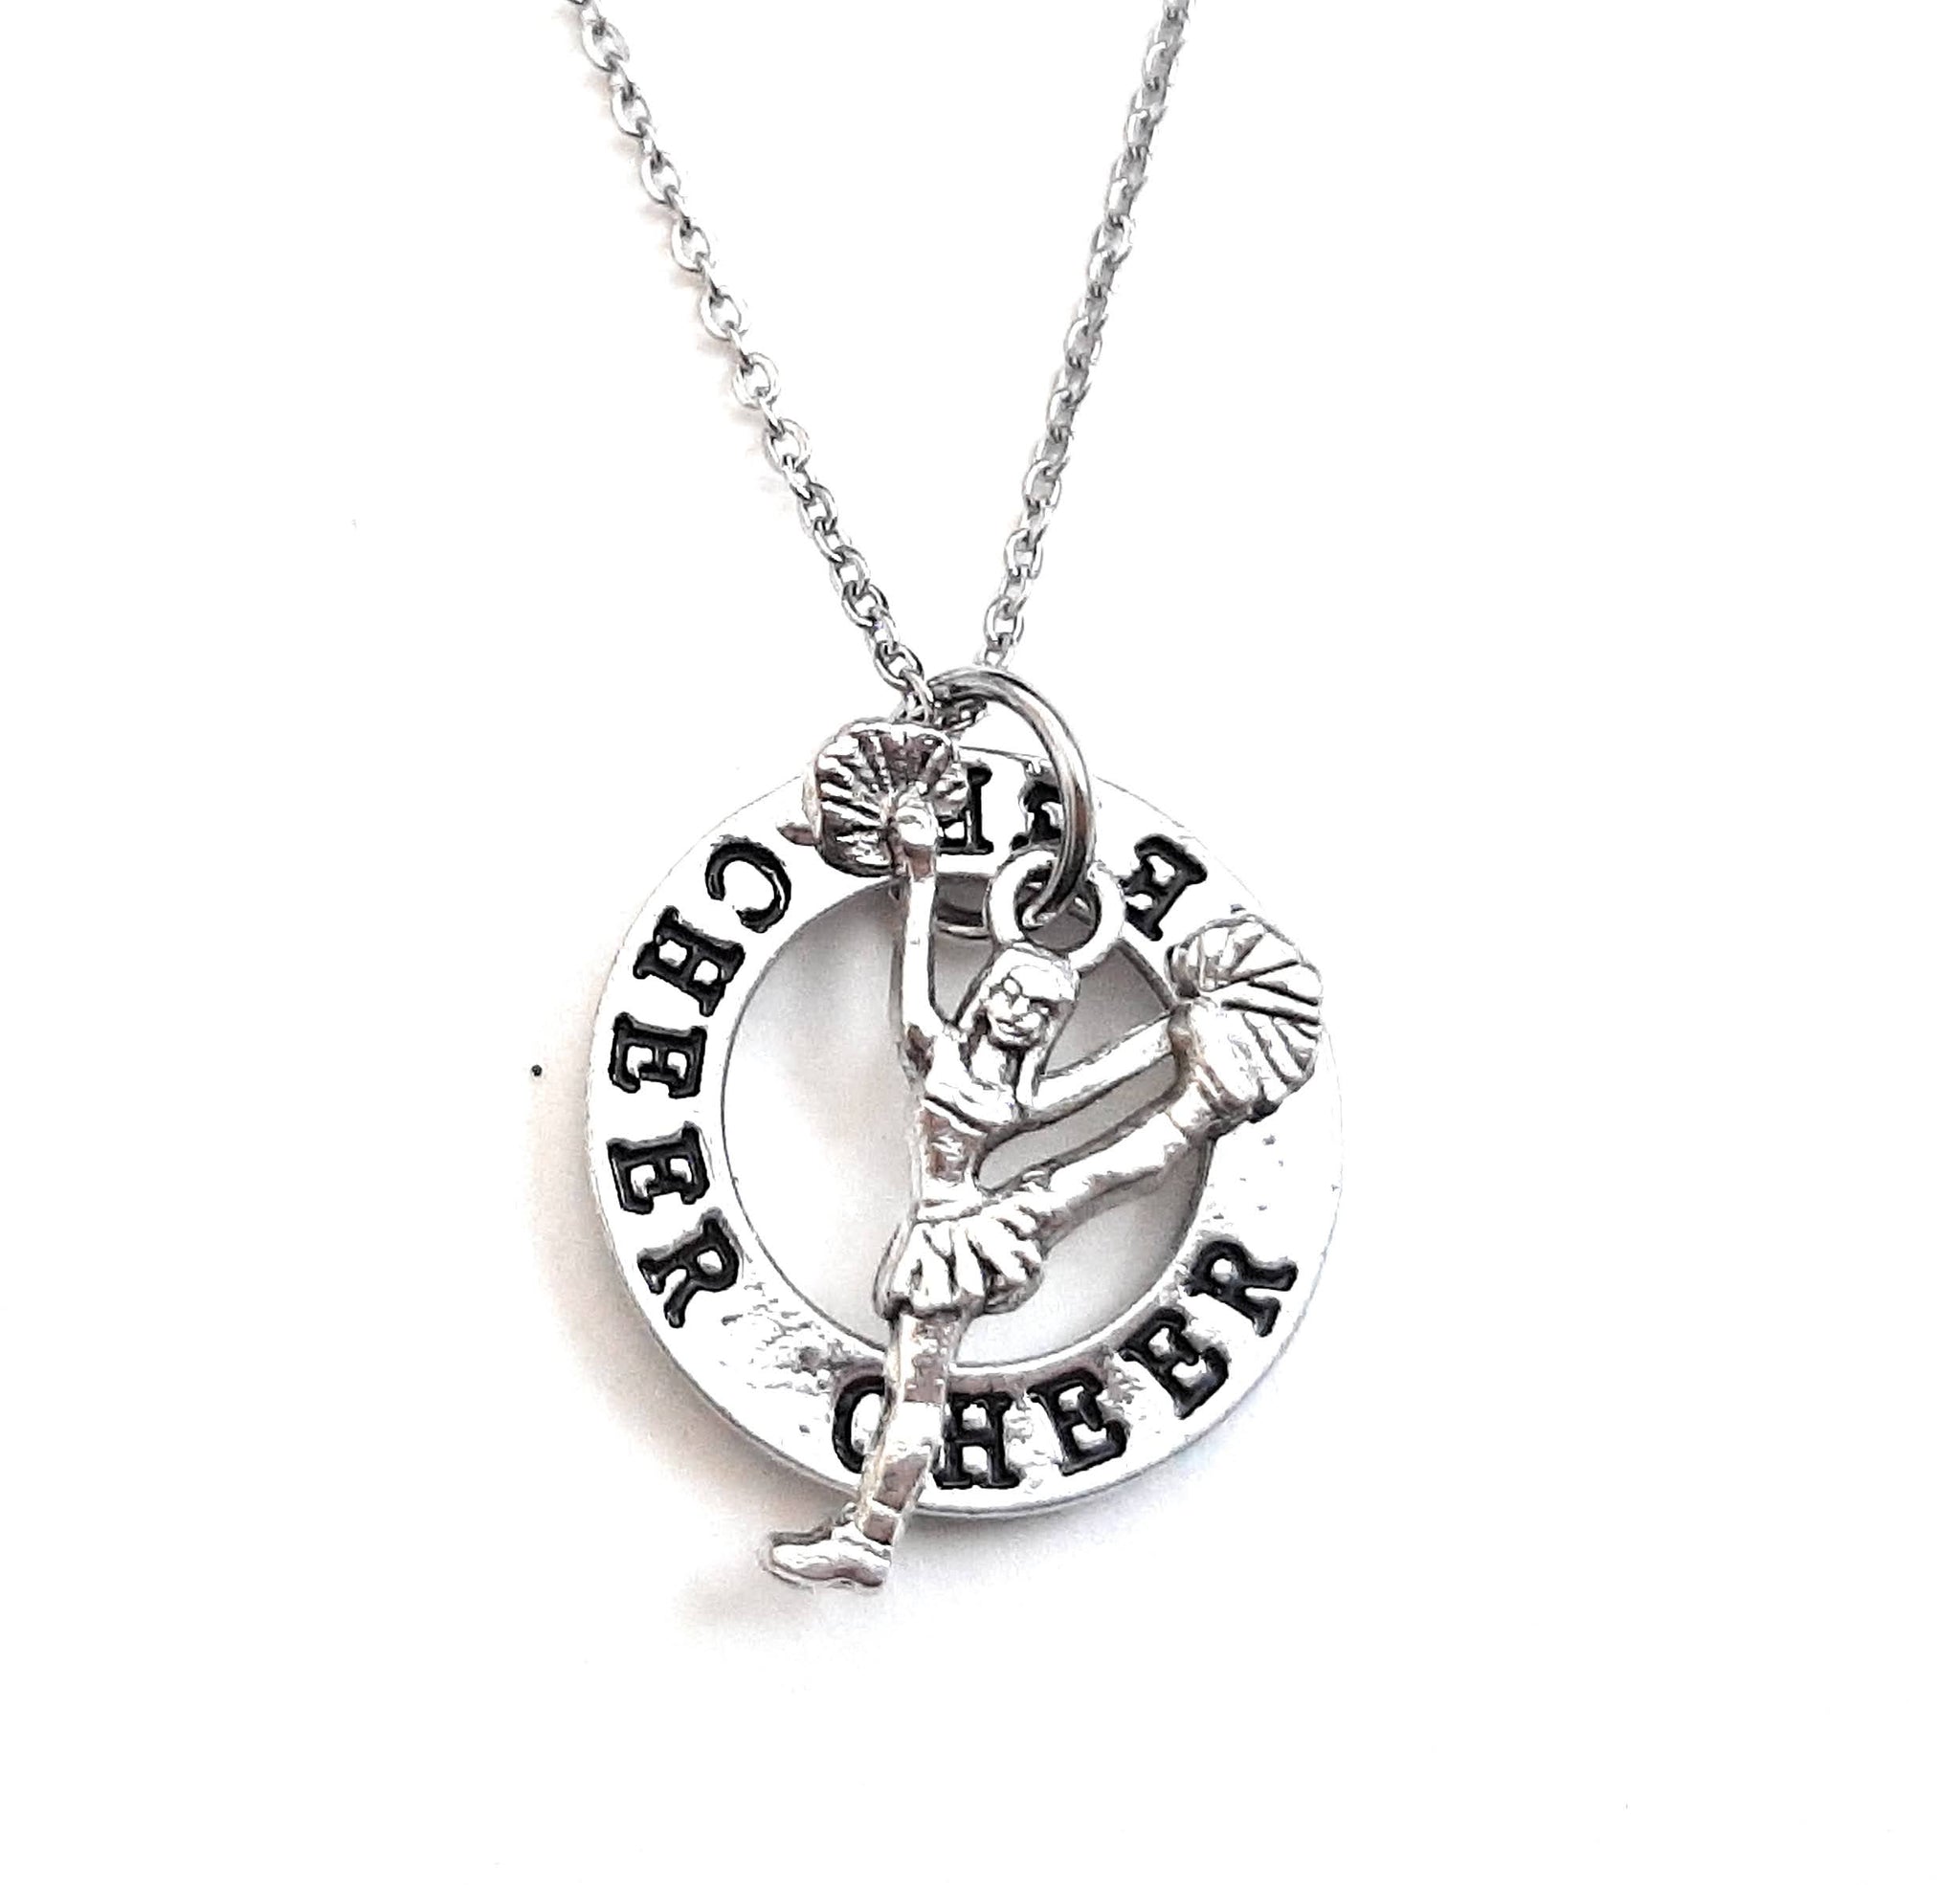 Cheerleader Message Pendant Necklace "Cheer" Your Choice of Charm and Birthstone Color